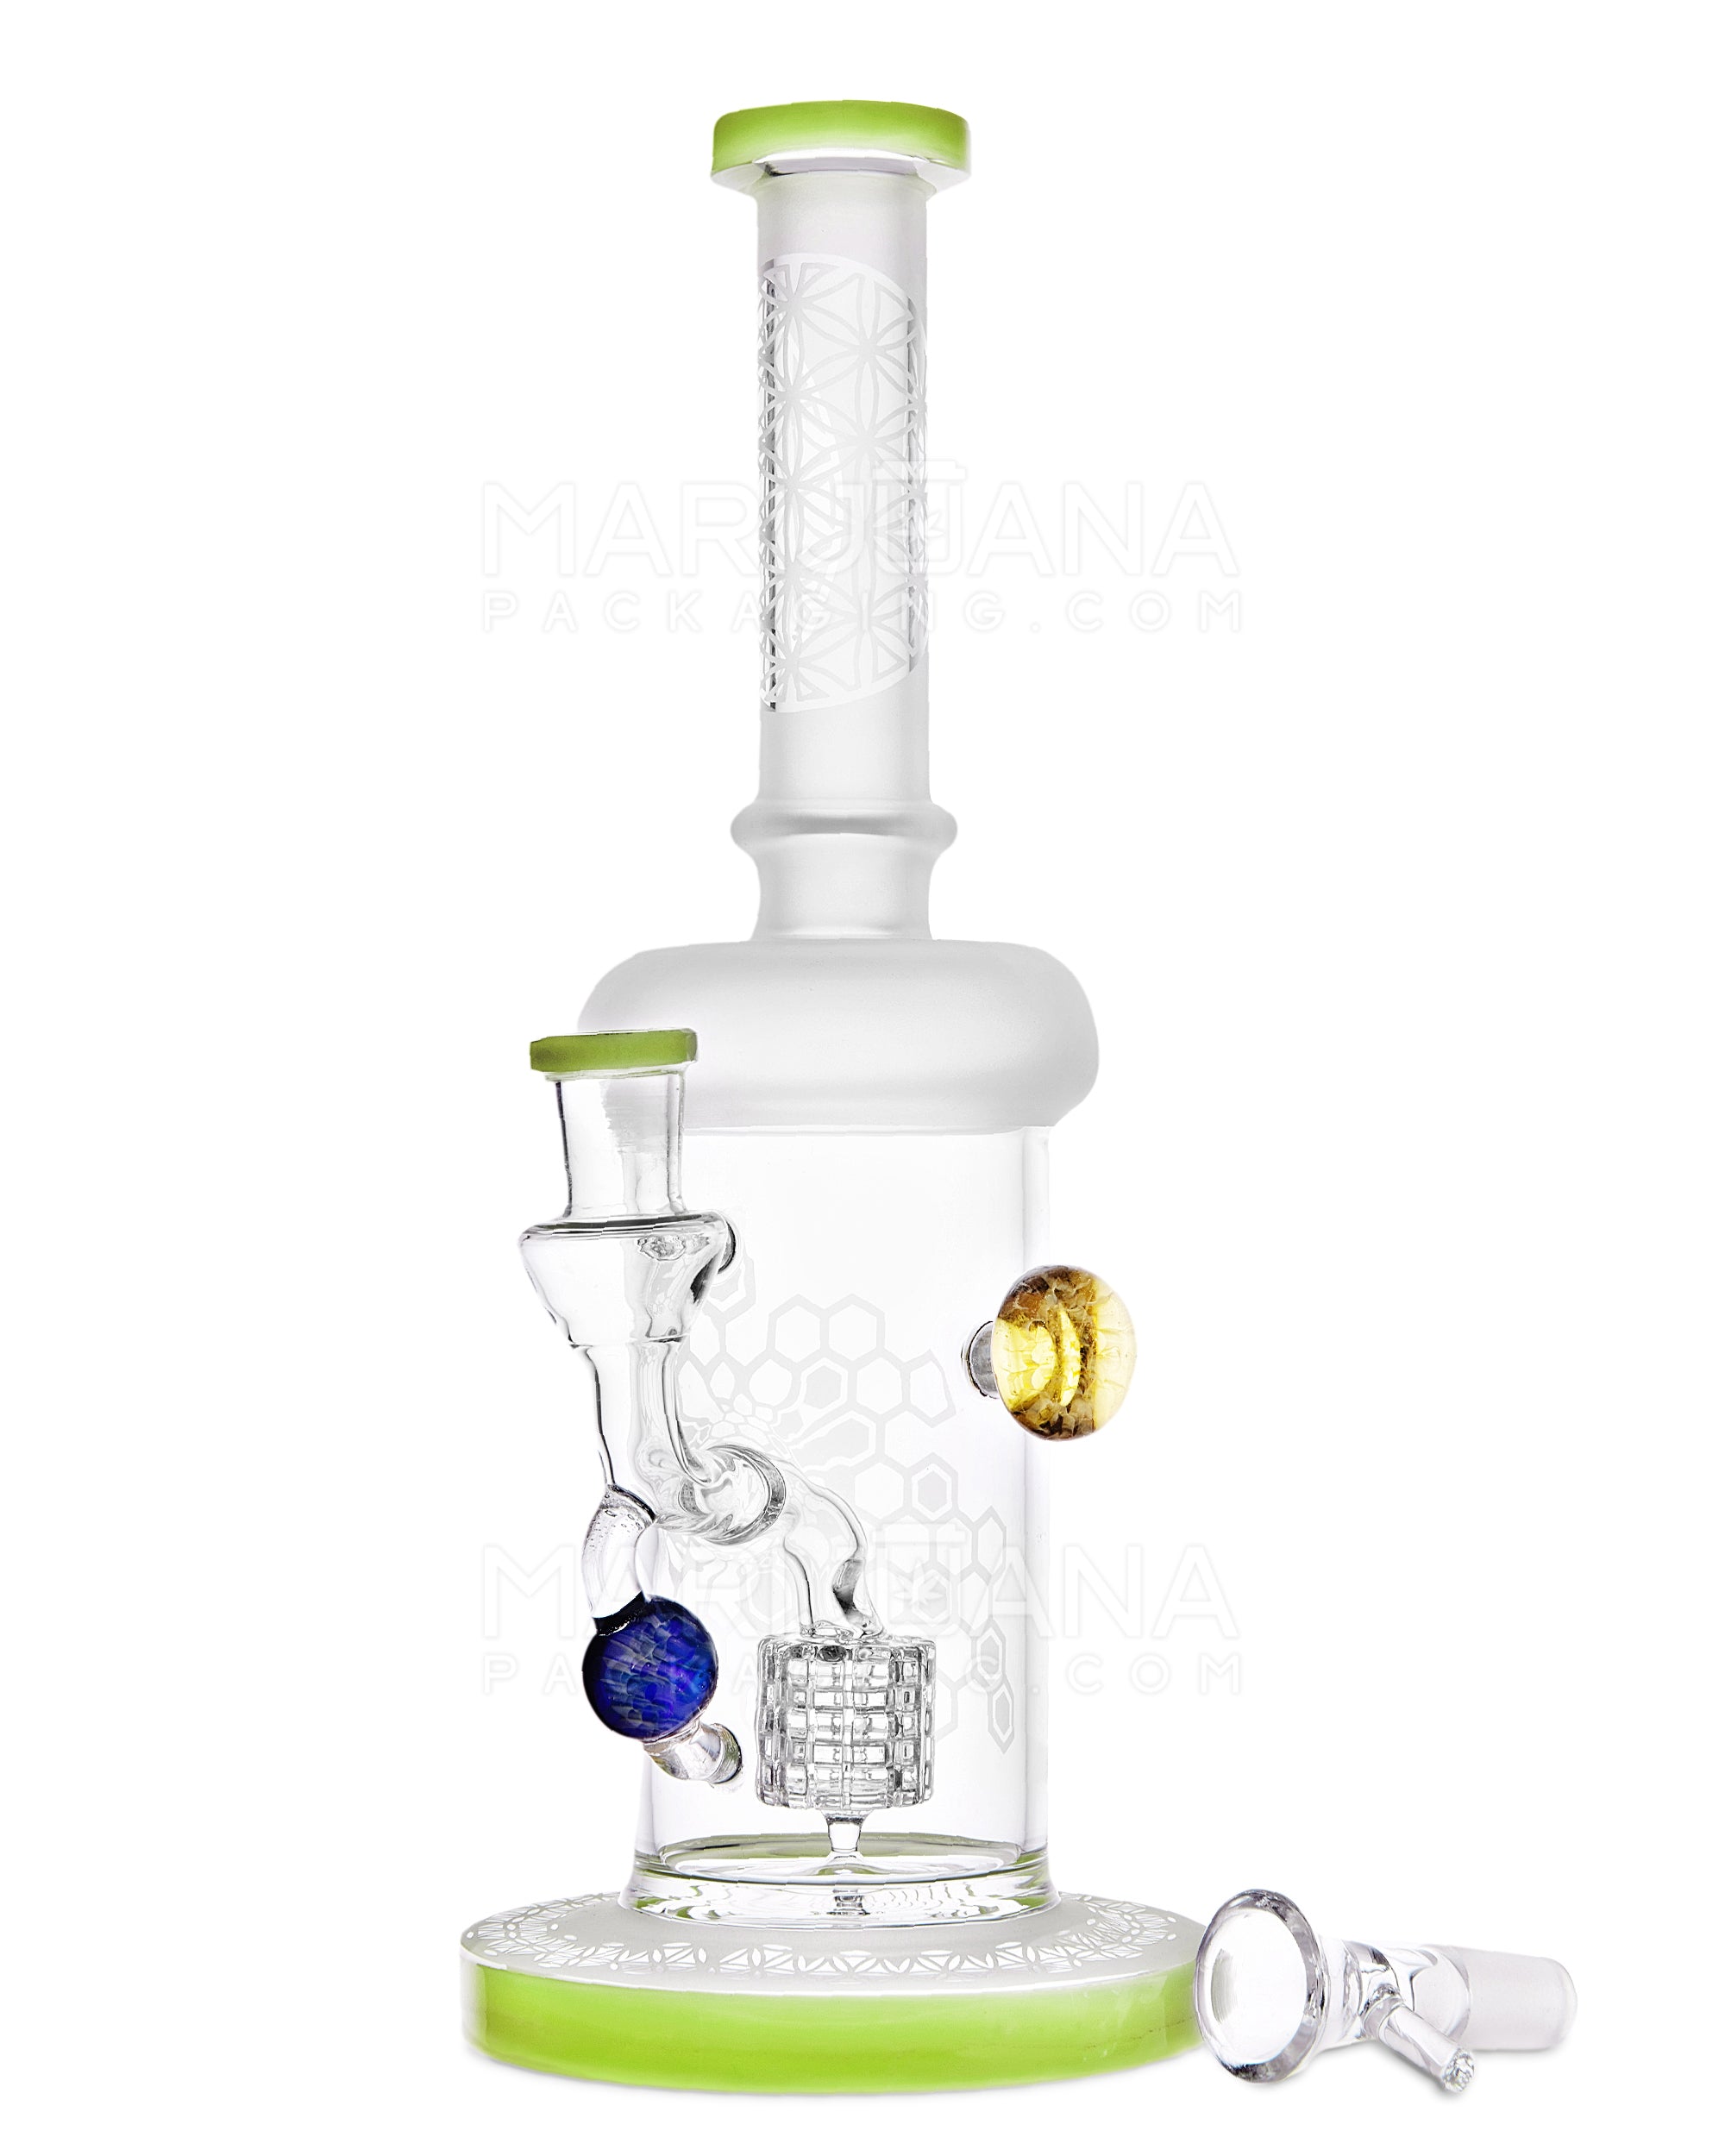 USA Glass | Straight Neck Matrix Perc Sandblasted Glass Water Pipe w/ Implosion Marbles | 11in Tall - 14mm Bowl - Slime - 2